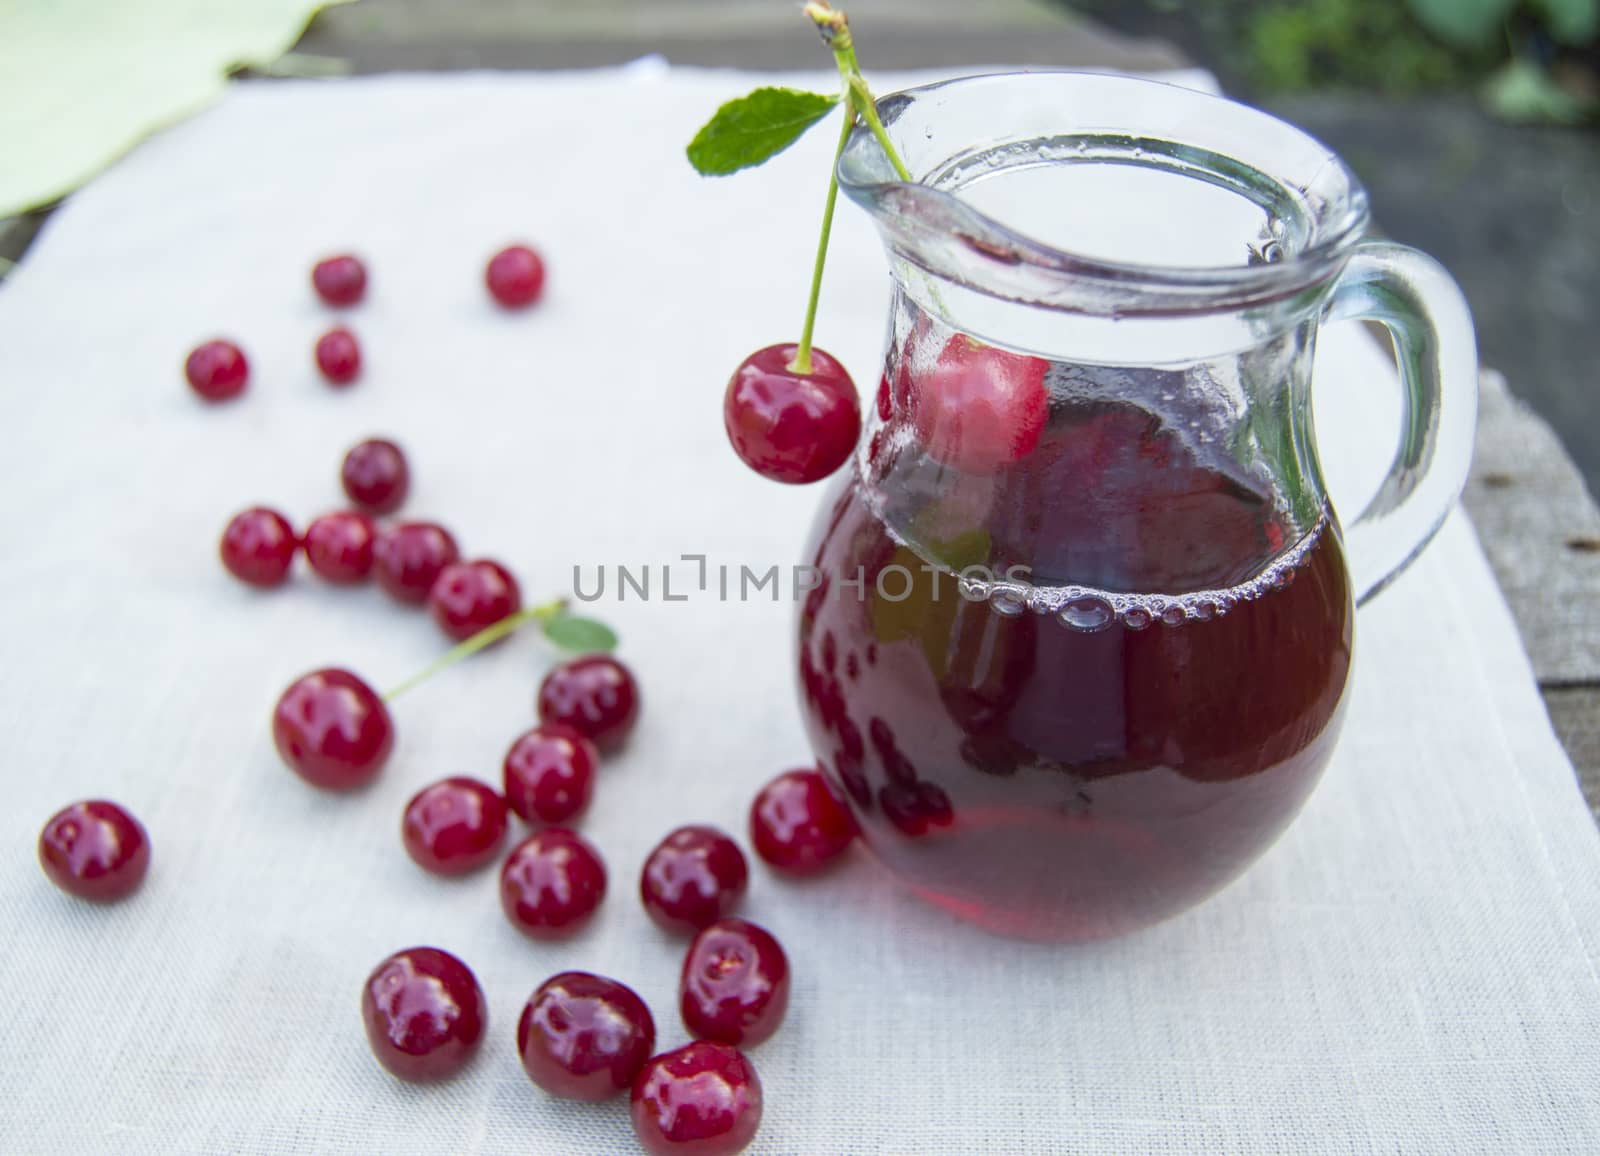 Cold cherry juice in jar and ripe berries, selective focus by claire_lucia